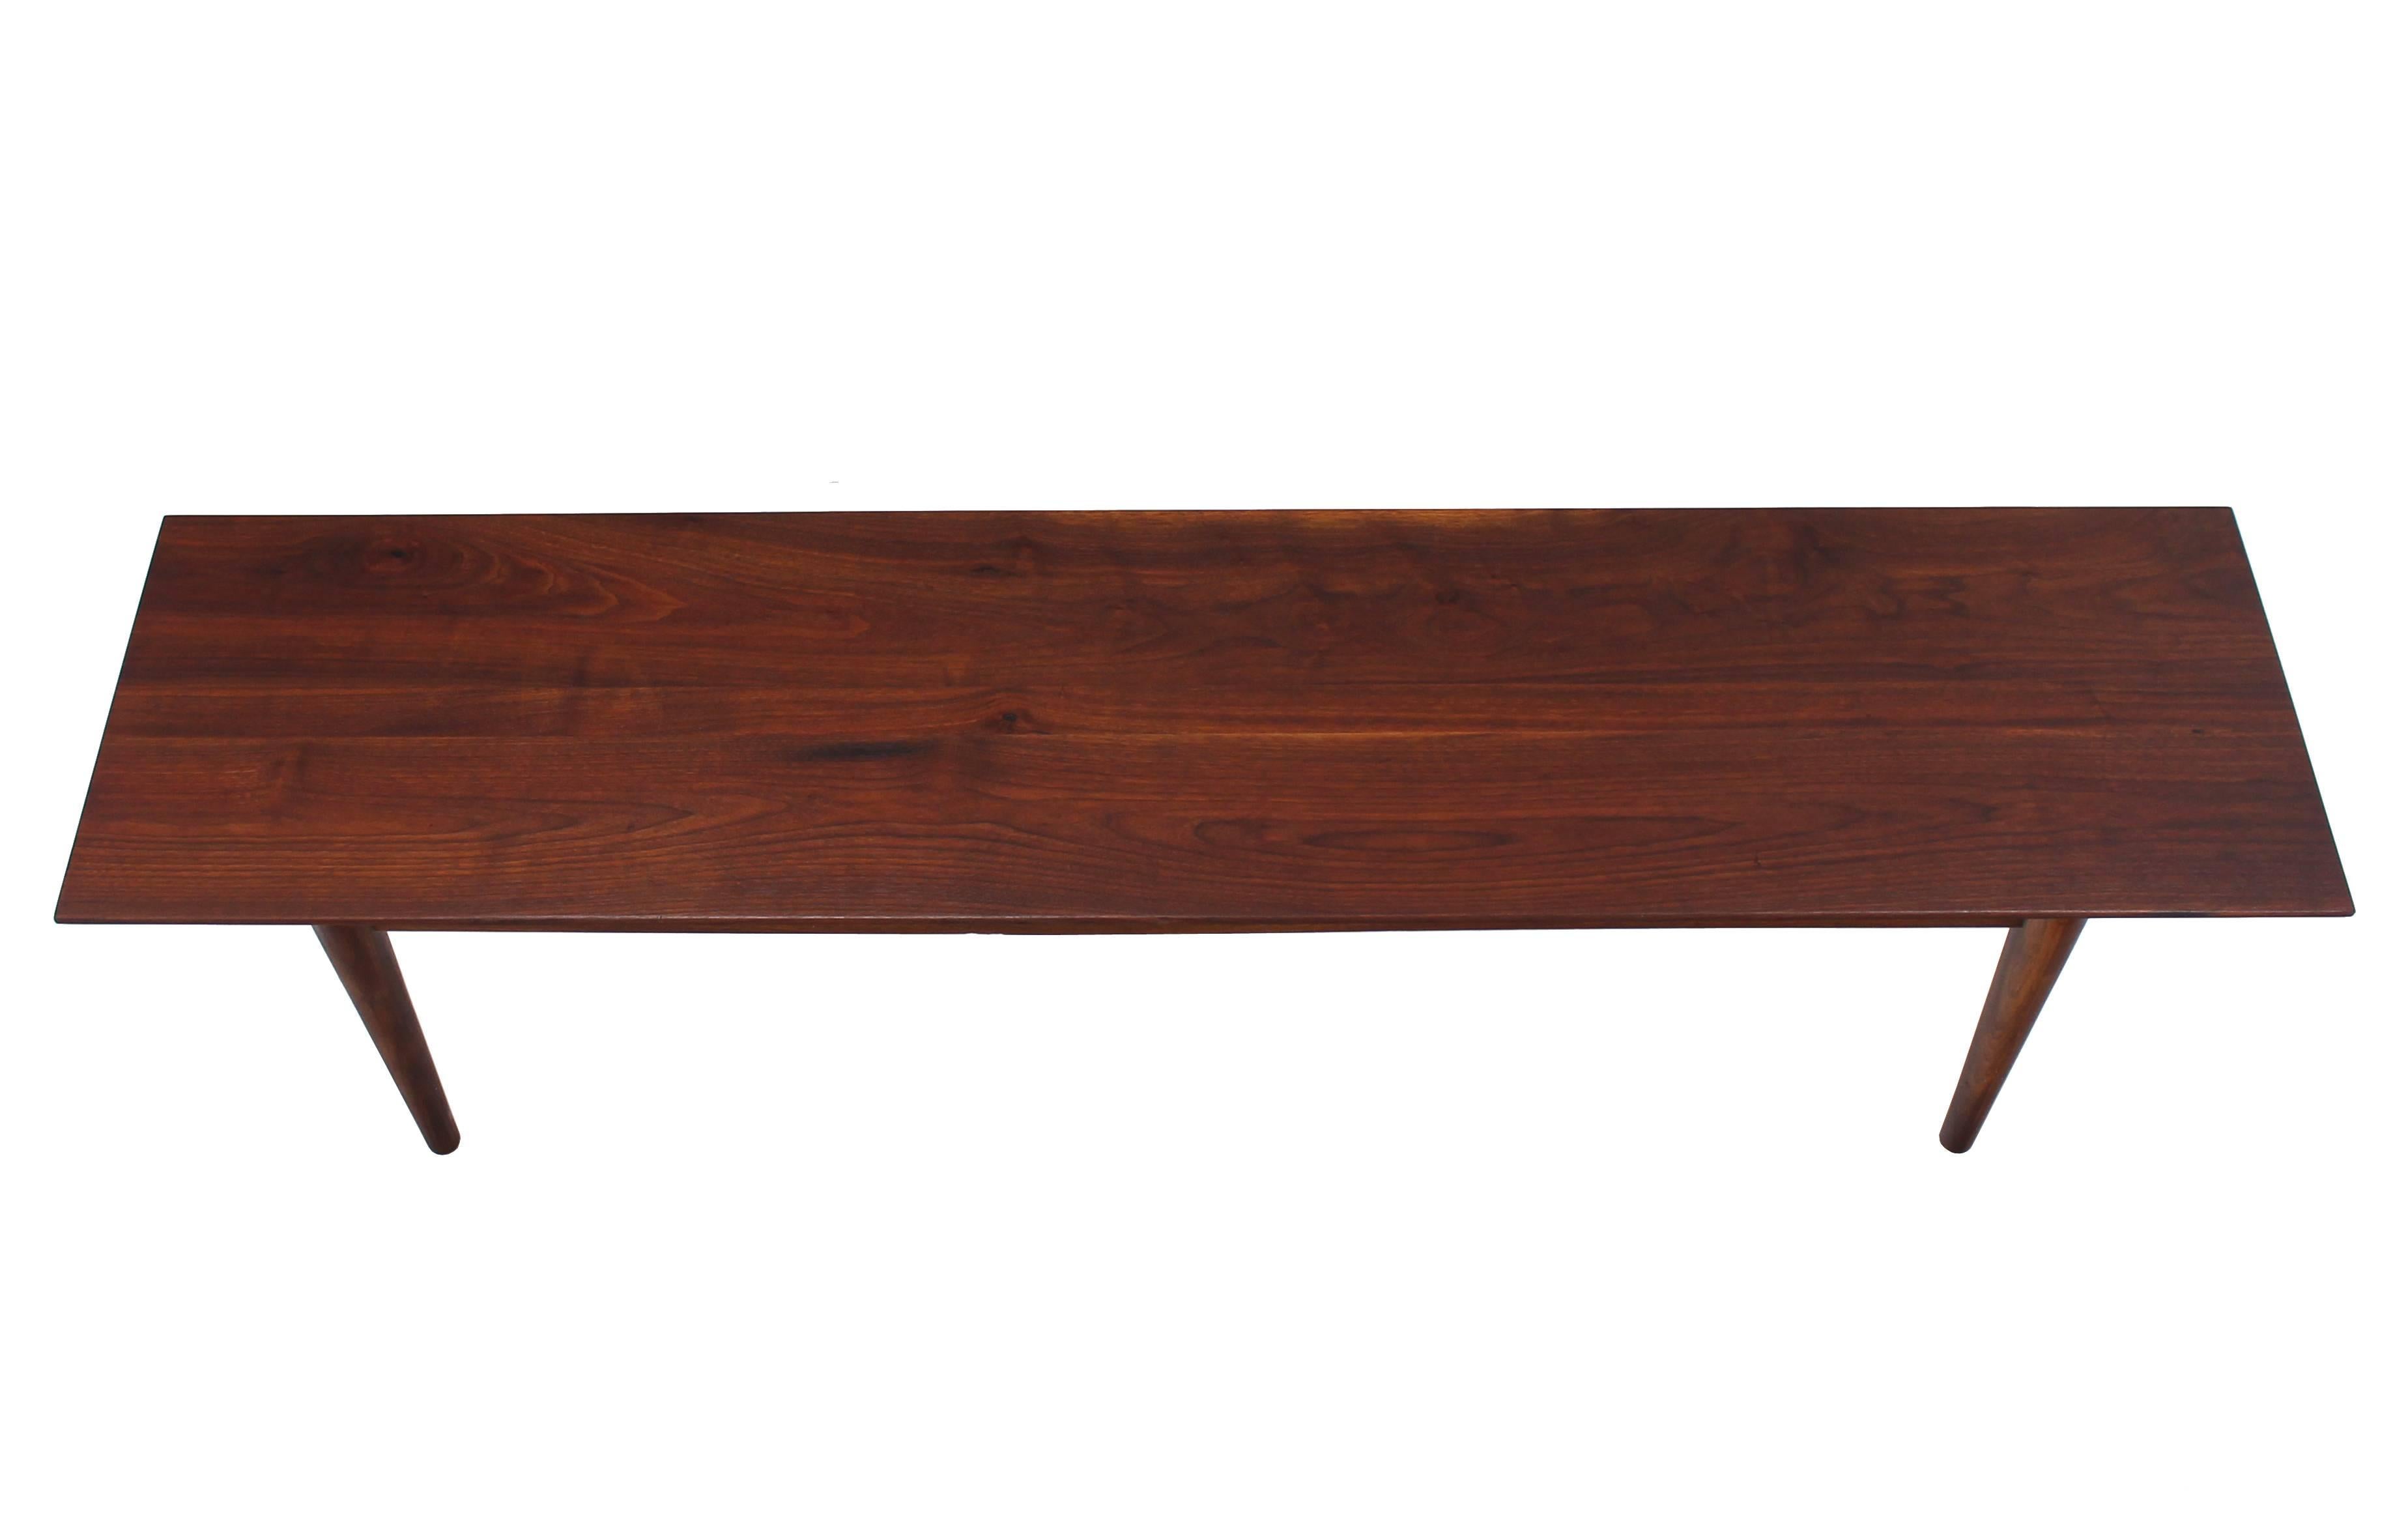 Rare Early Walnut Bench or Coffee Table by Risom For Sale 1